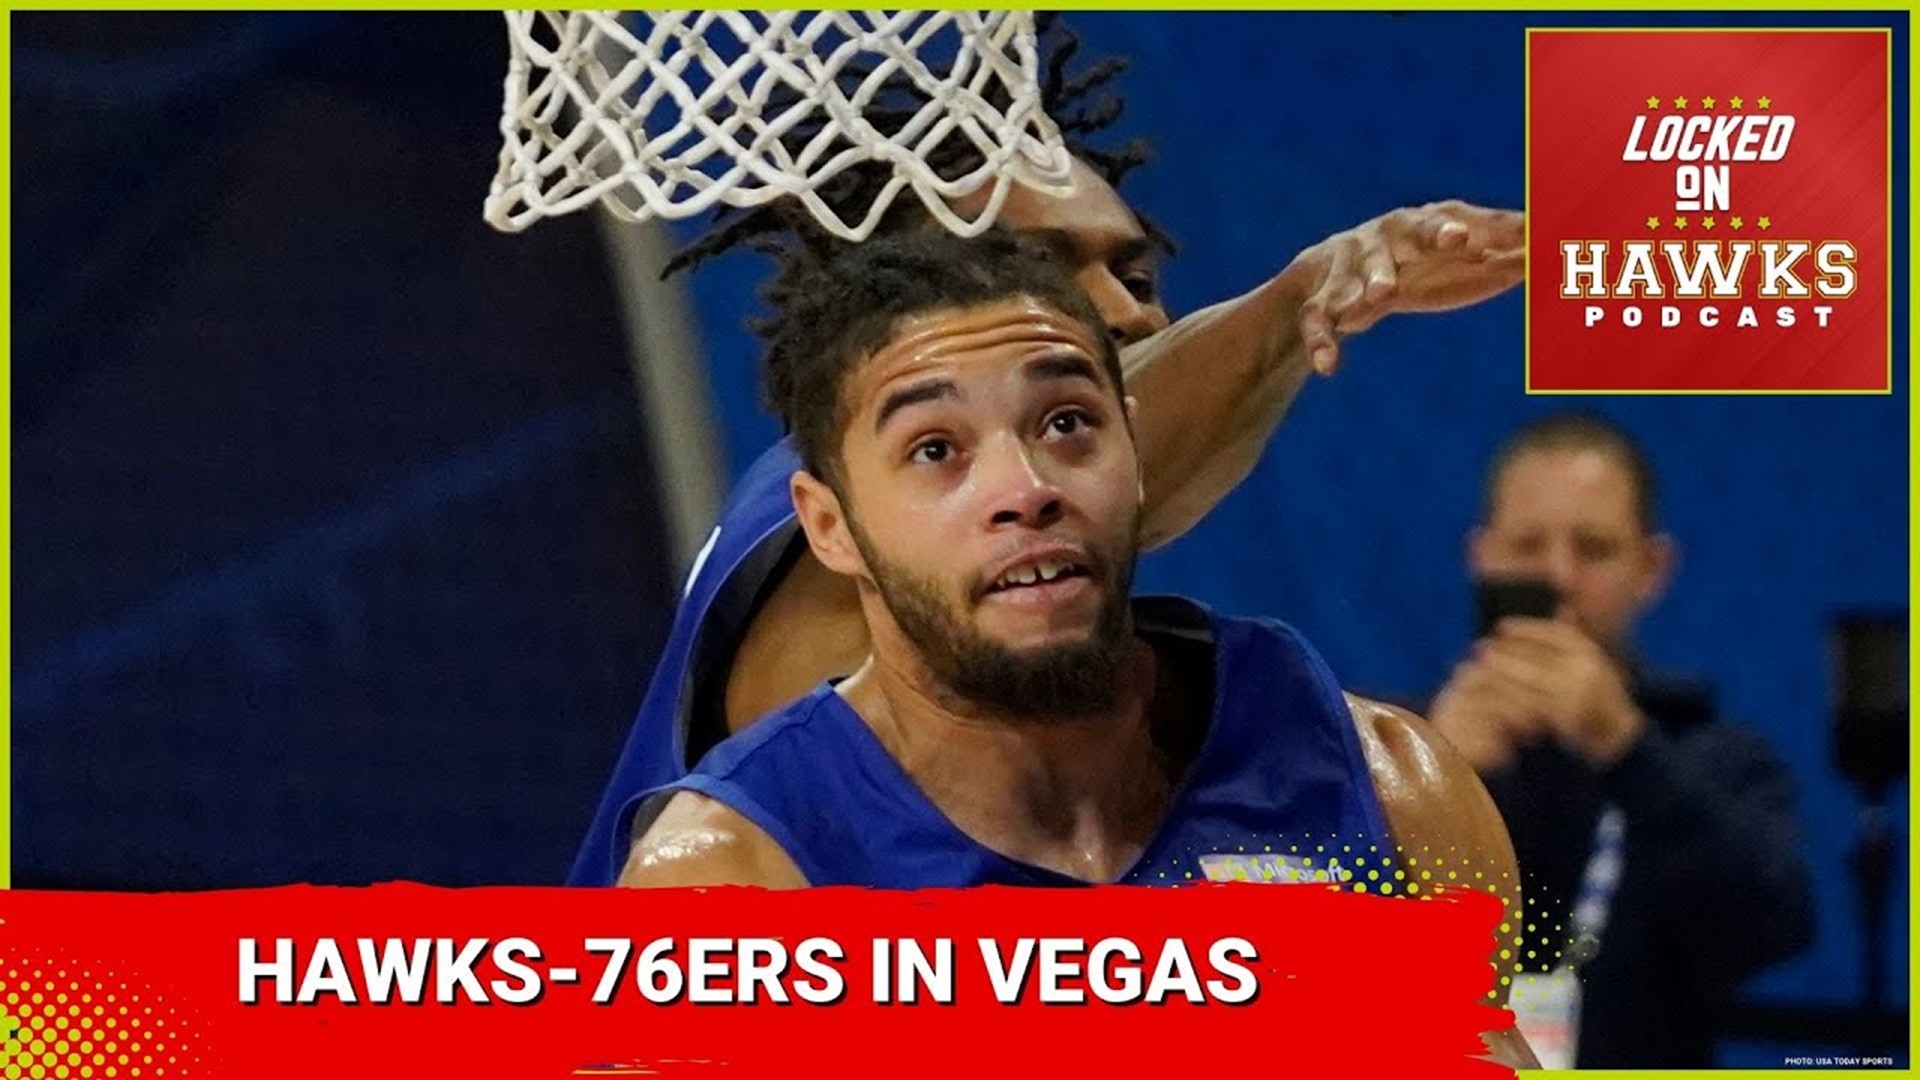 The show breaks down Thursday's Summer League game between the Atlanta Hawks and the Philadelphia 76ers, including late heroics from Kobe Bufkin.